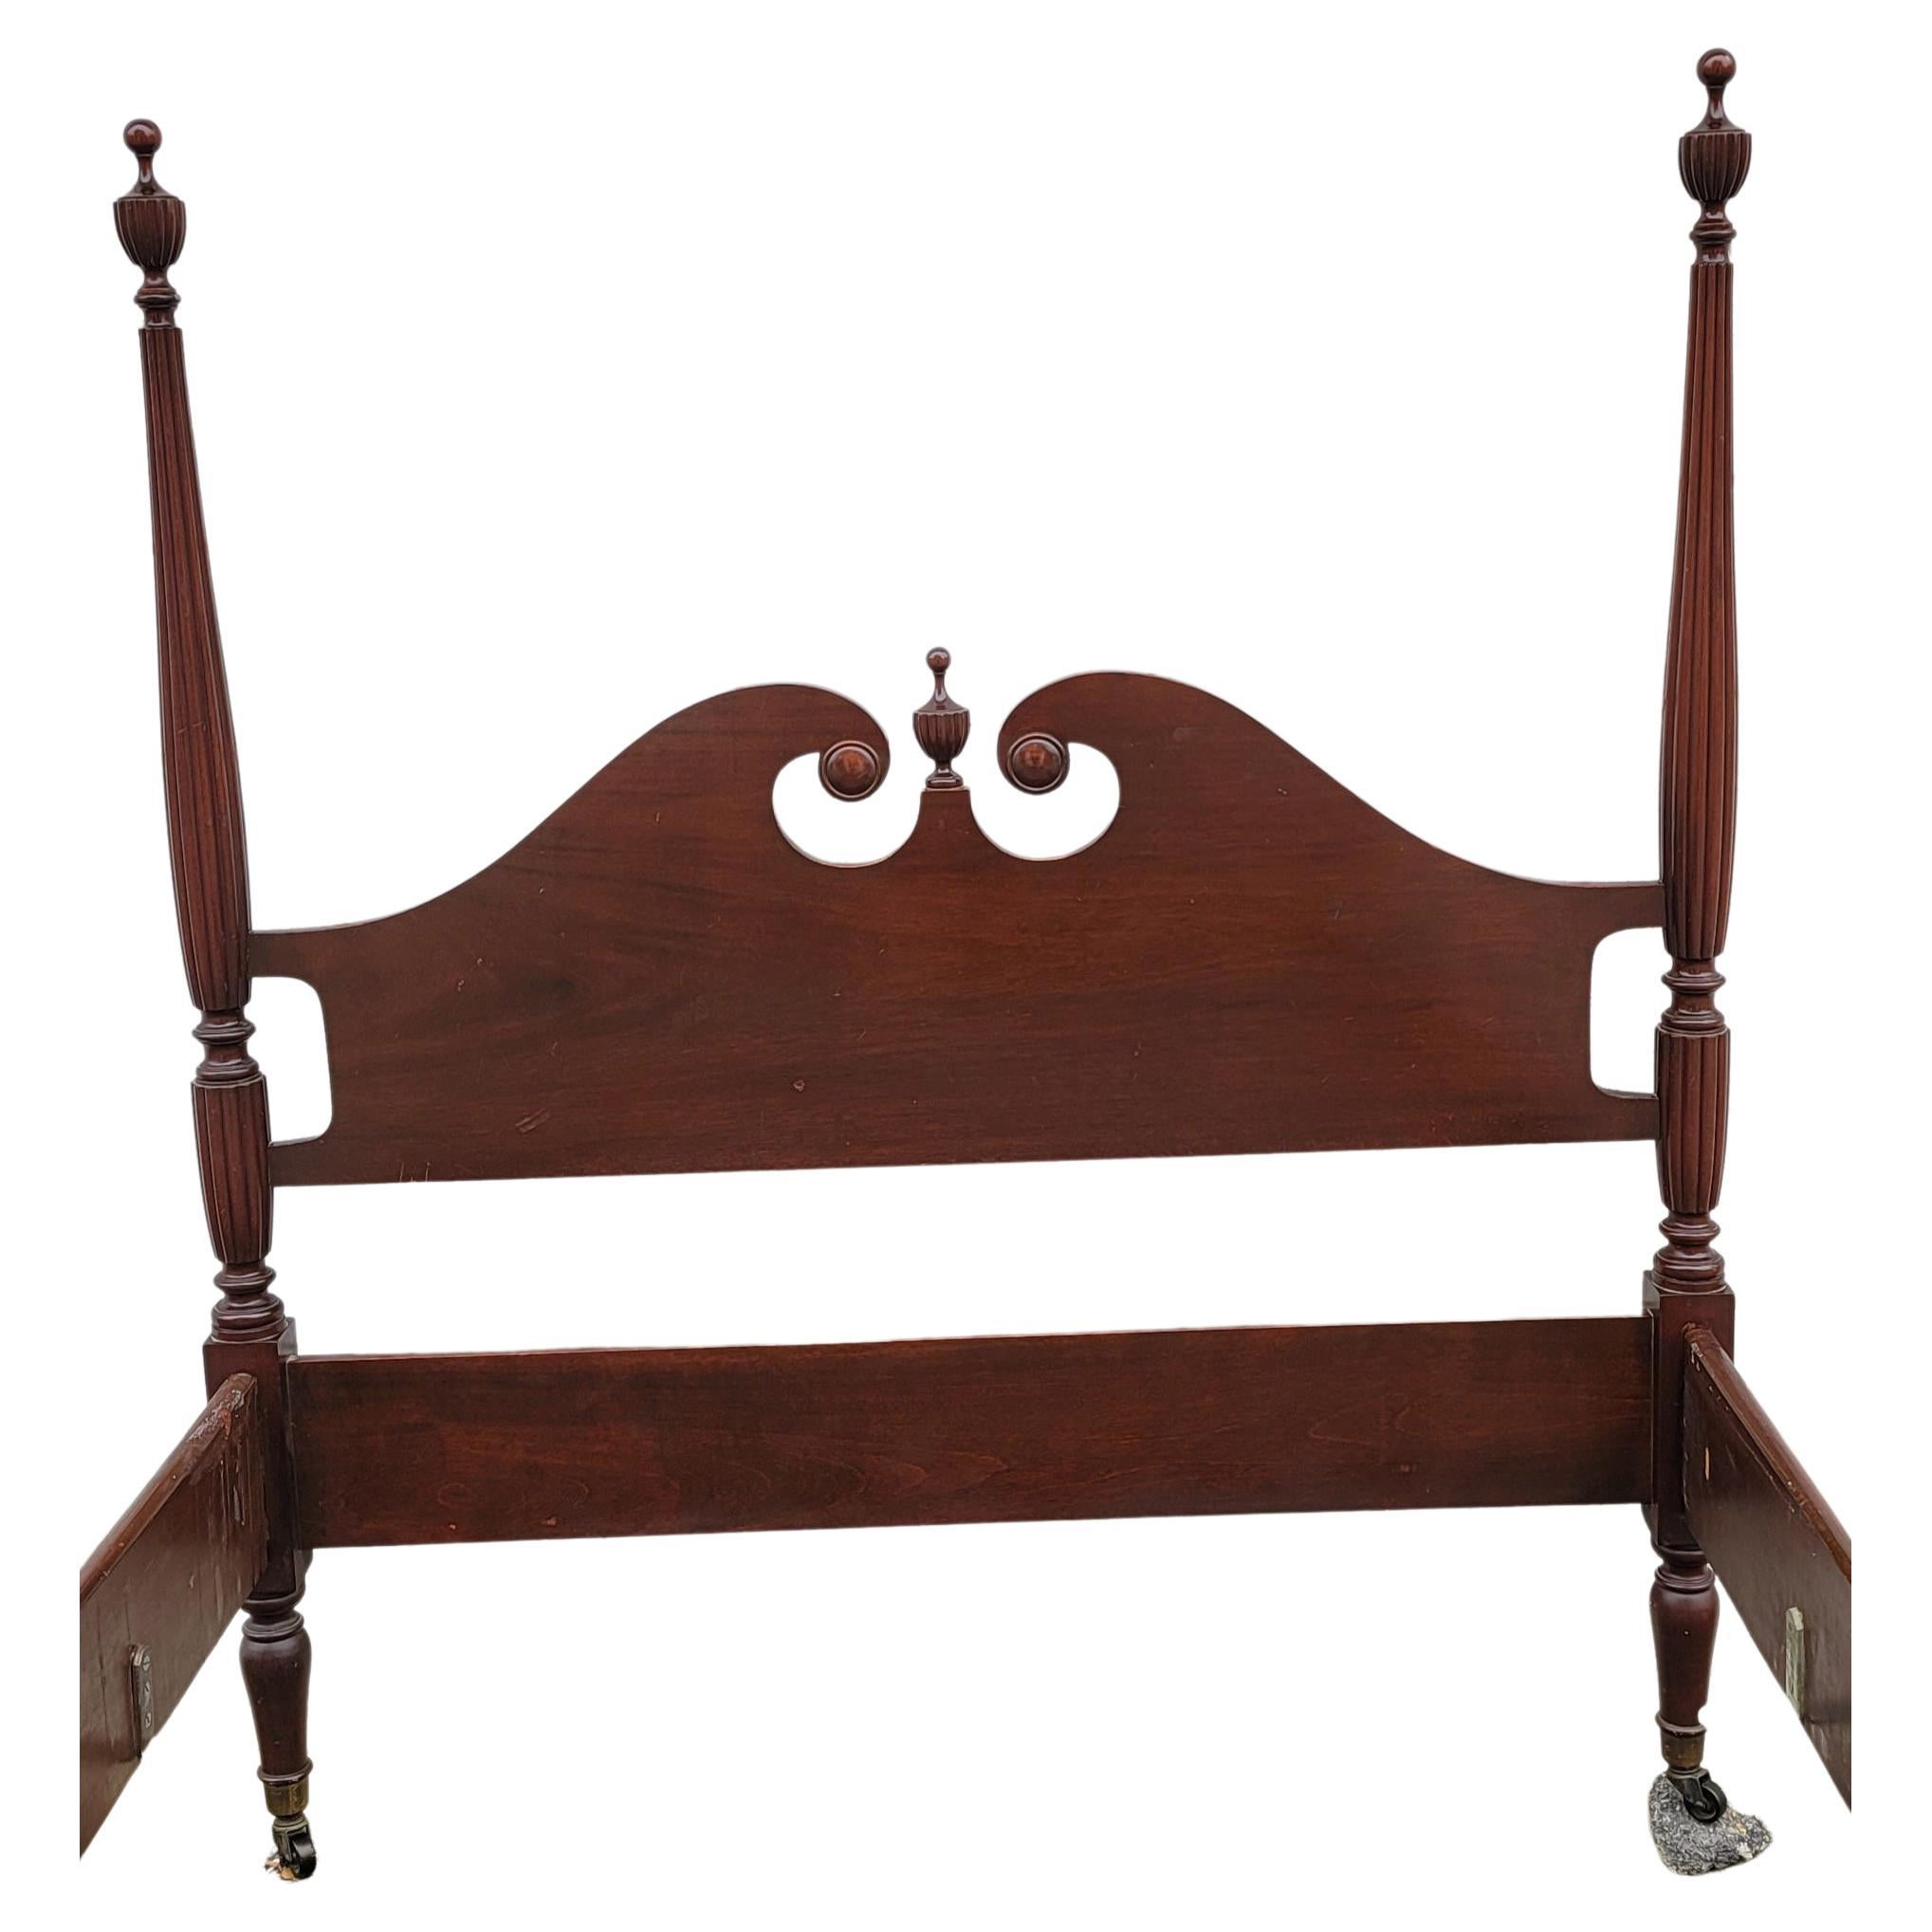 1940s Mahogany Full Size 4 Poster Bed on Wheels with Urn Finials. Made off of Pure Mahogany throughout. Measures 57.5